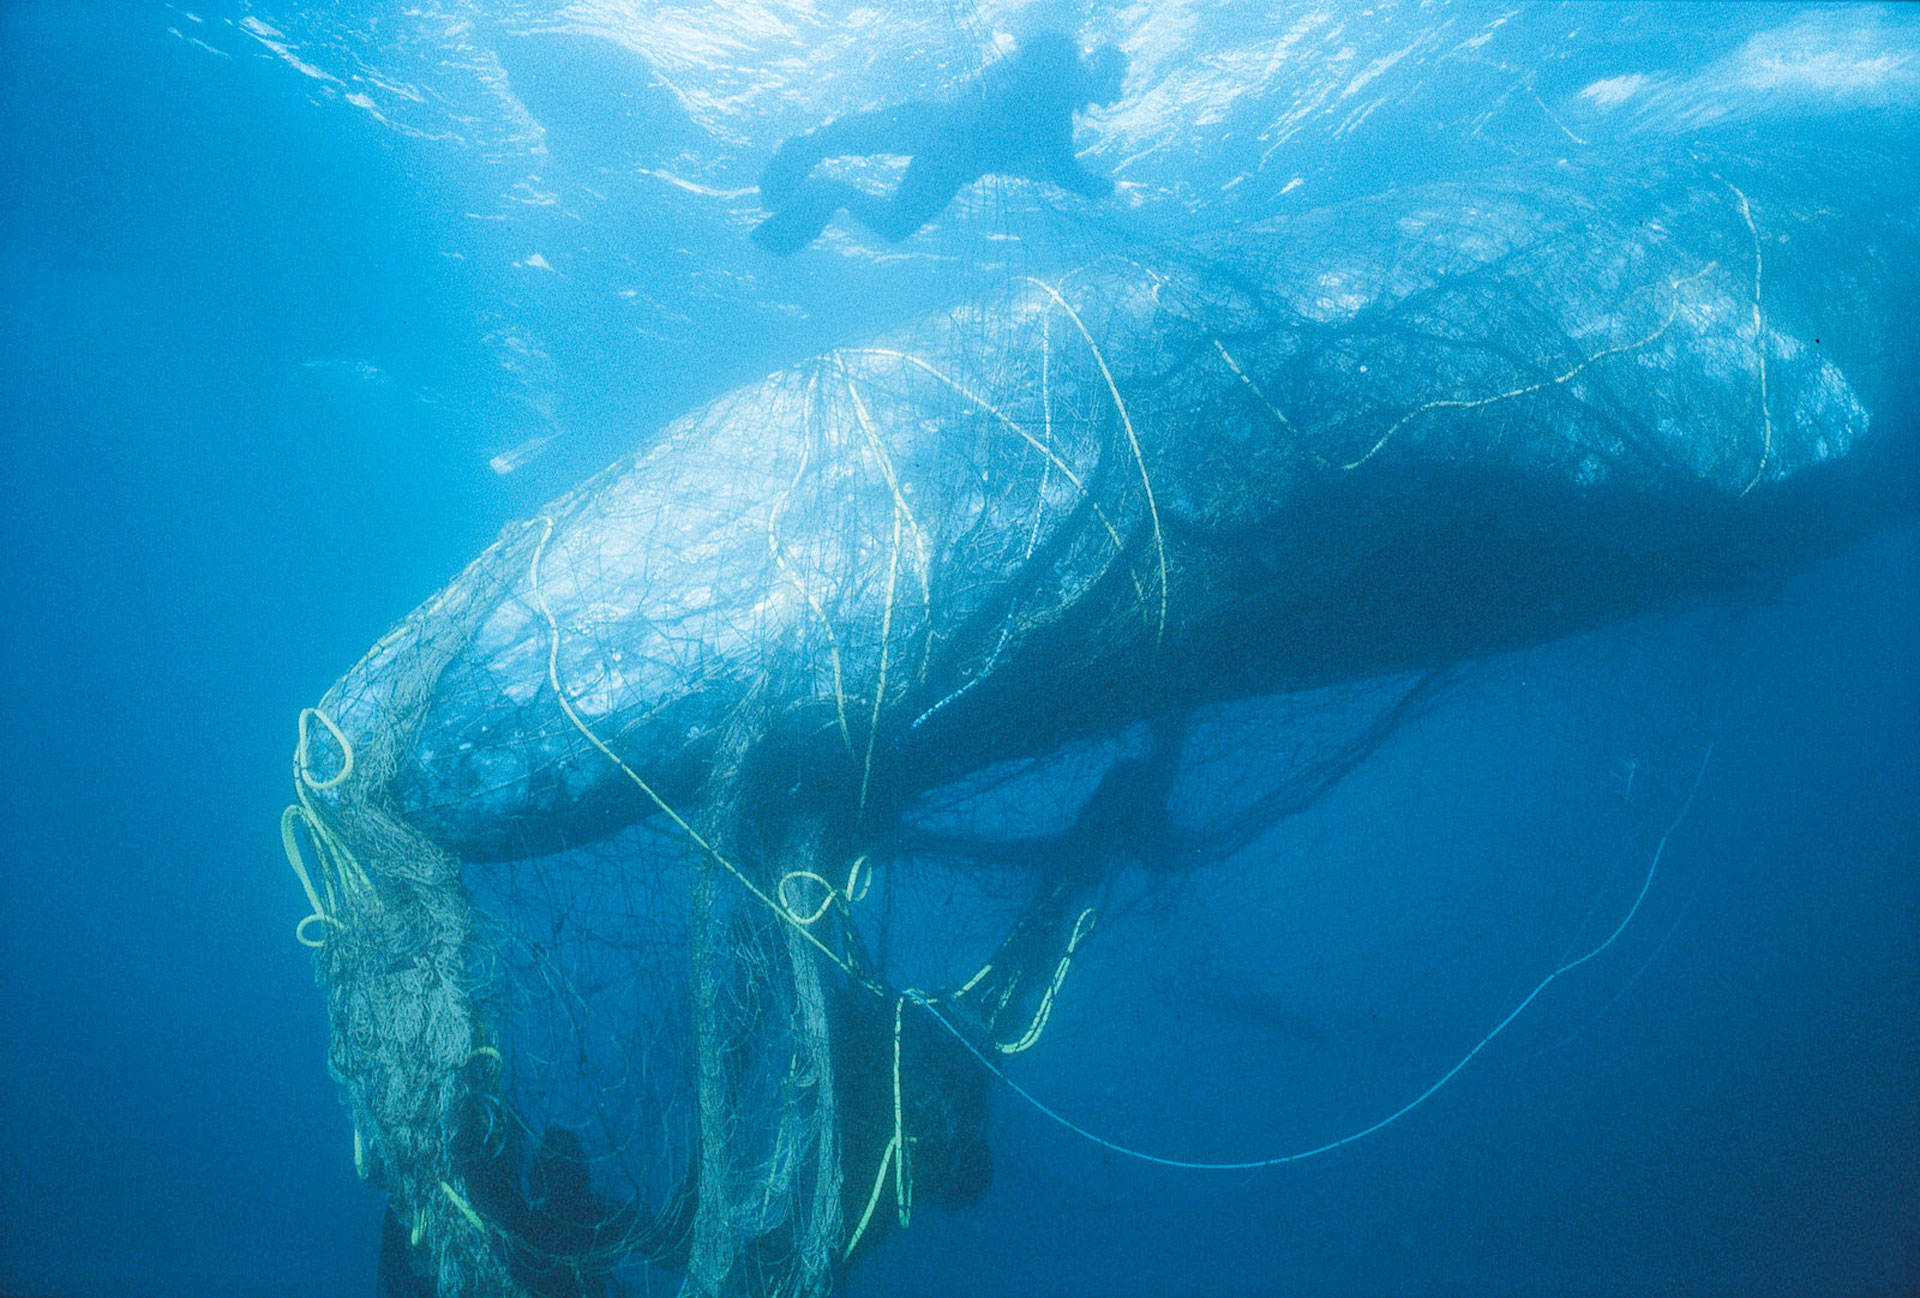 Rescuers untangle a gray whale from ghost net off the coast of California. Bob Talbot/Marine Photobank/Courtesy of World Animal Protection